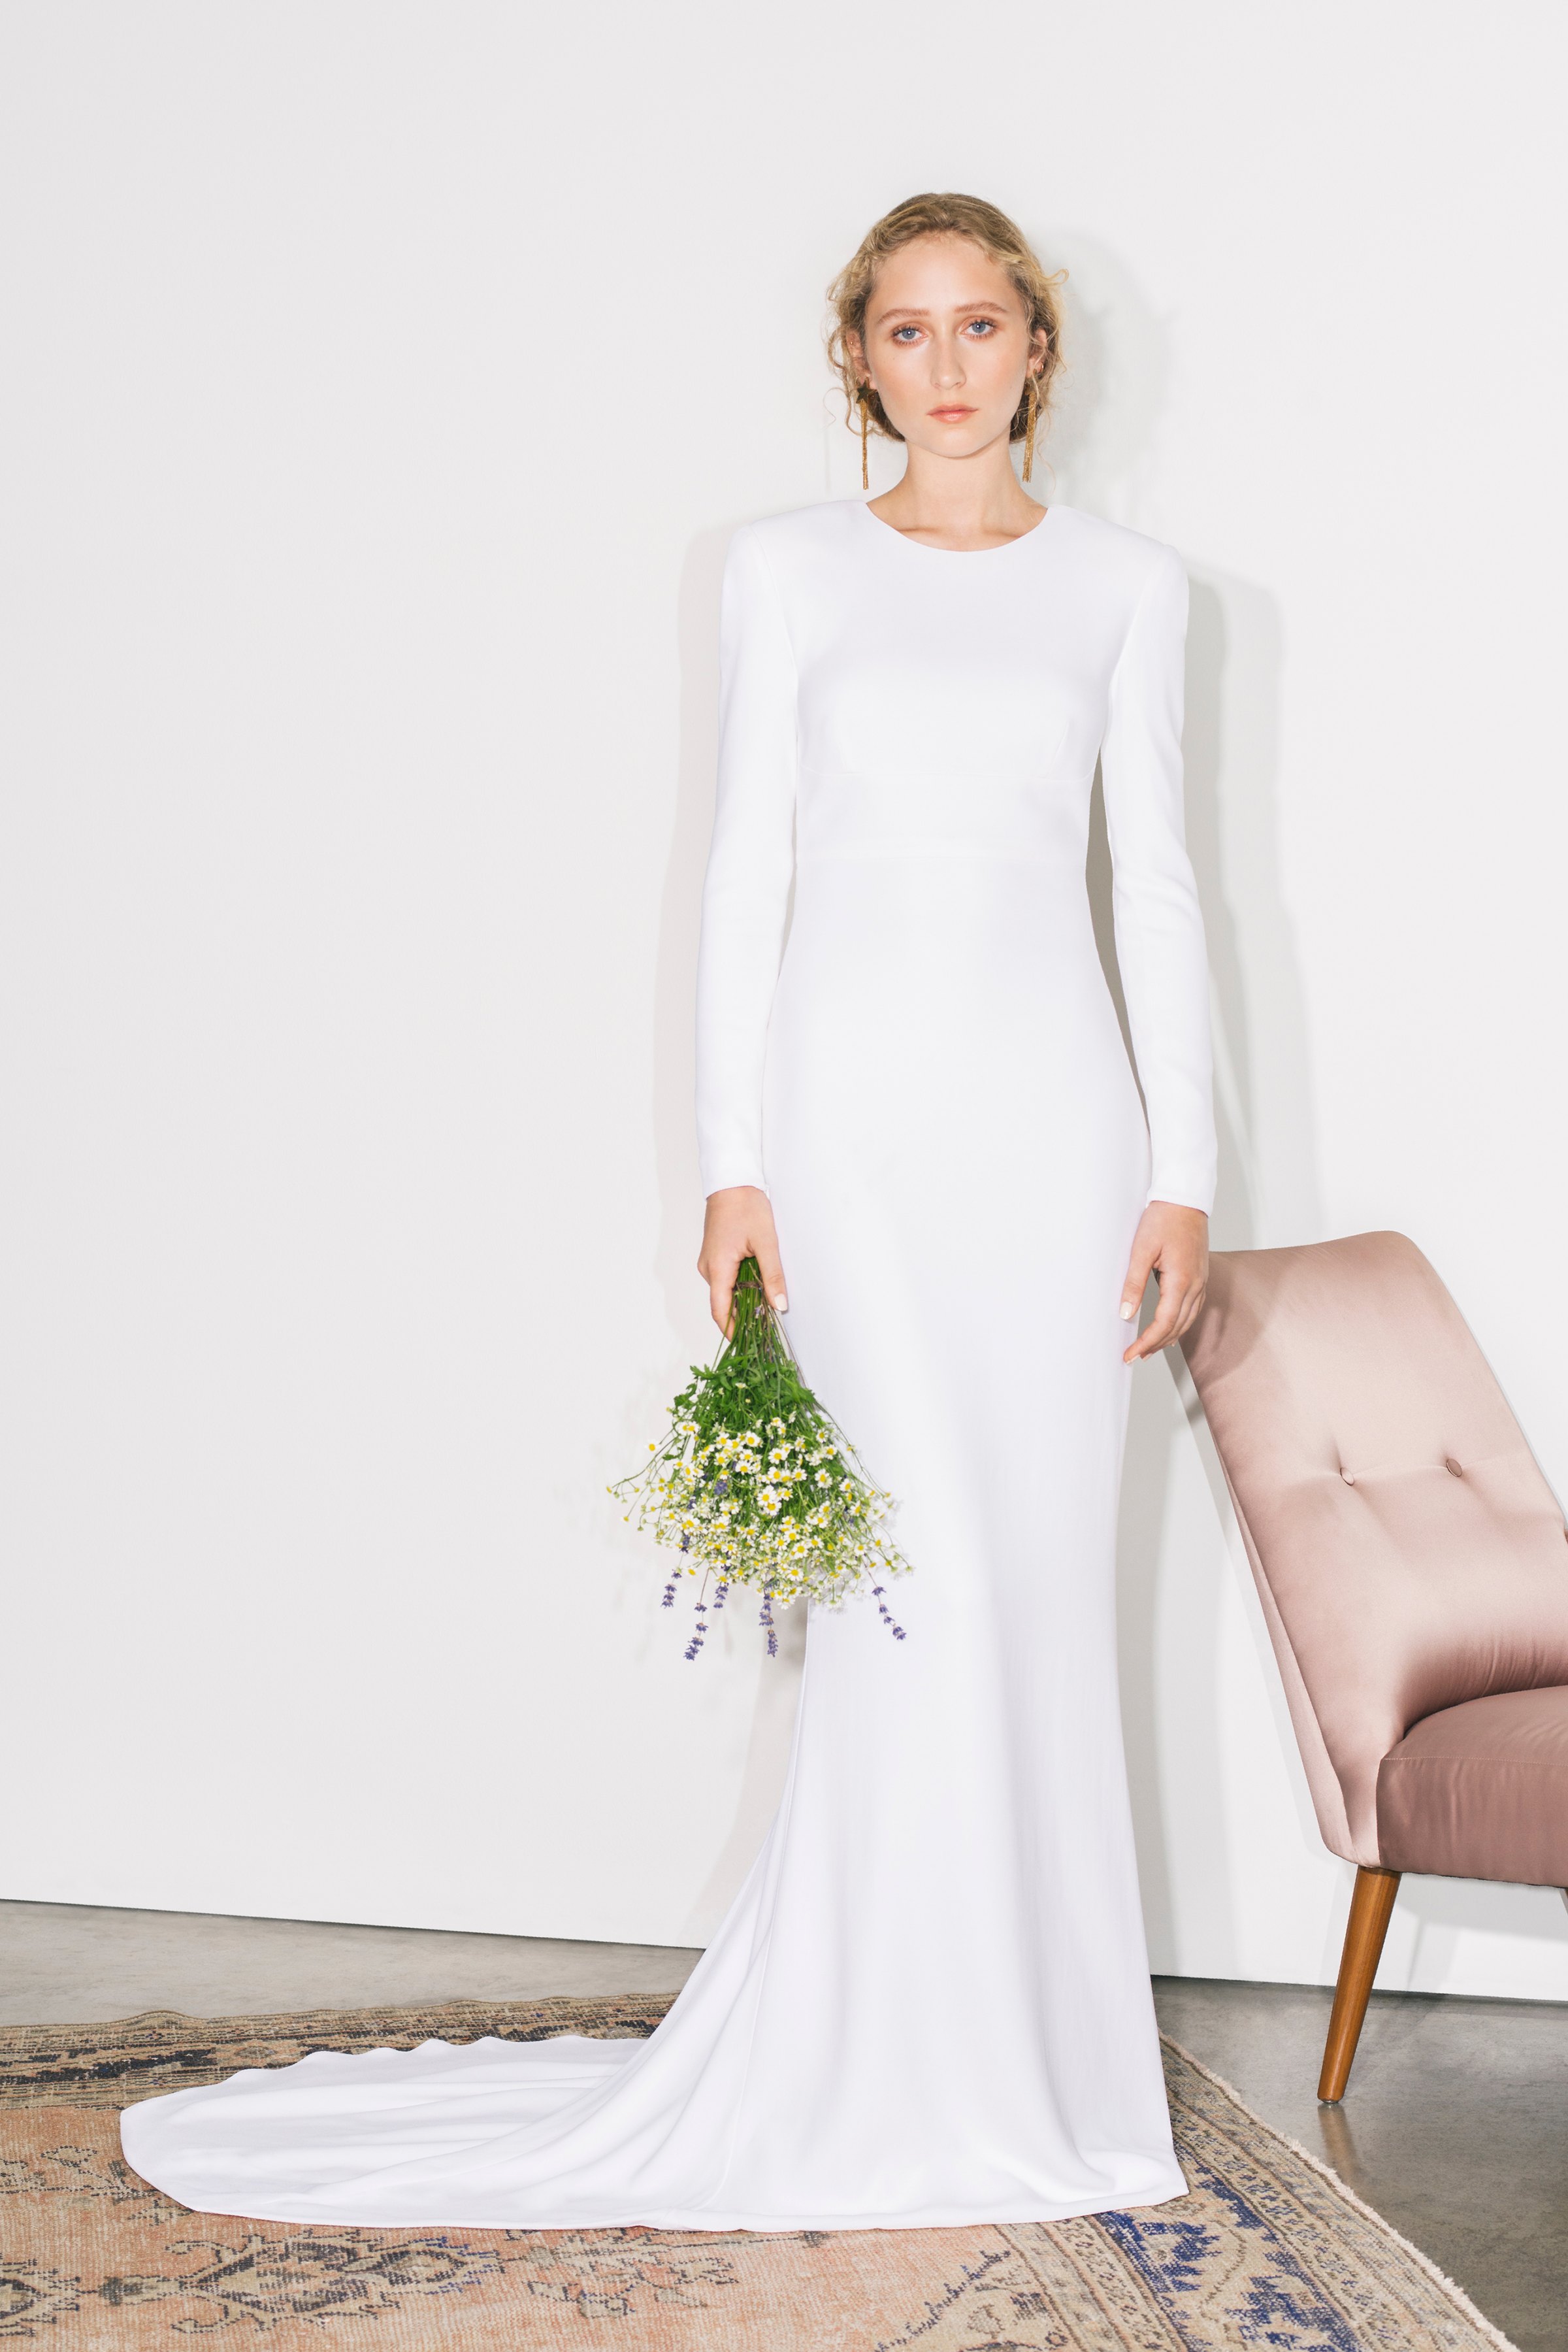 Stella Mccartney Launches Royal Wedding Bridal Collection Details